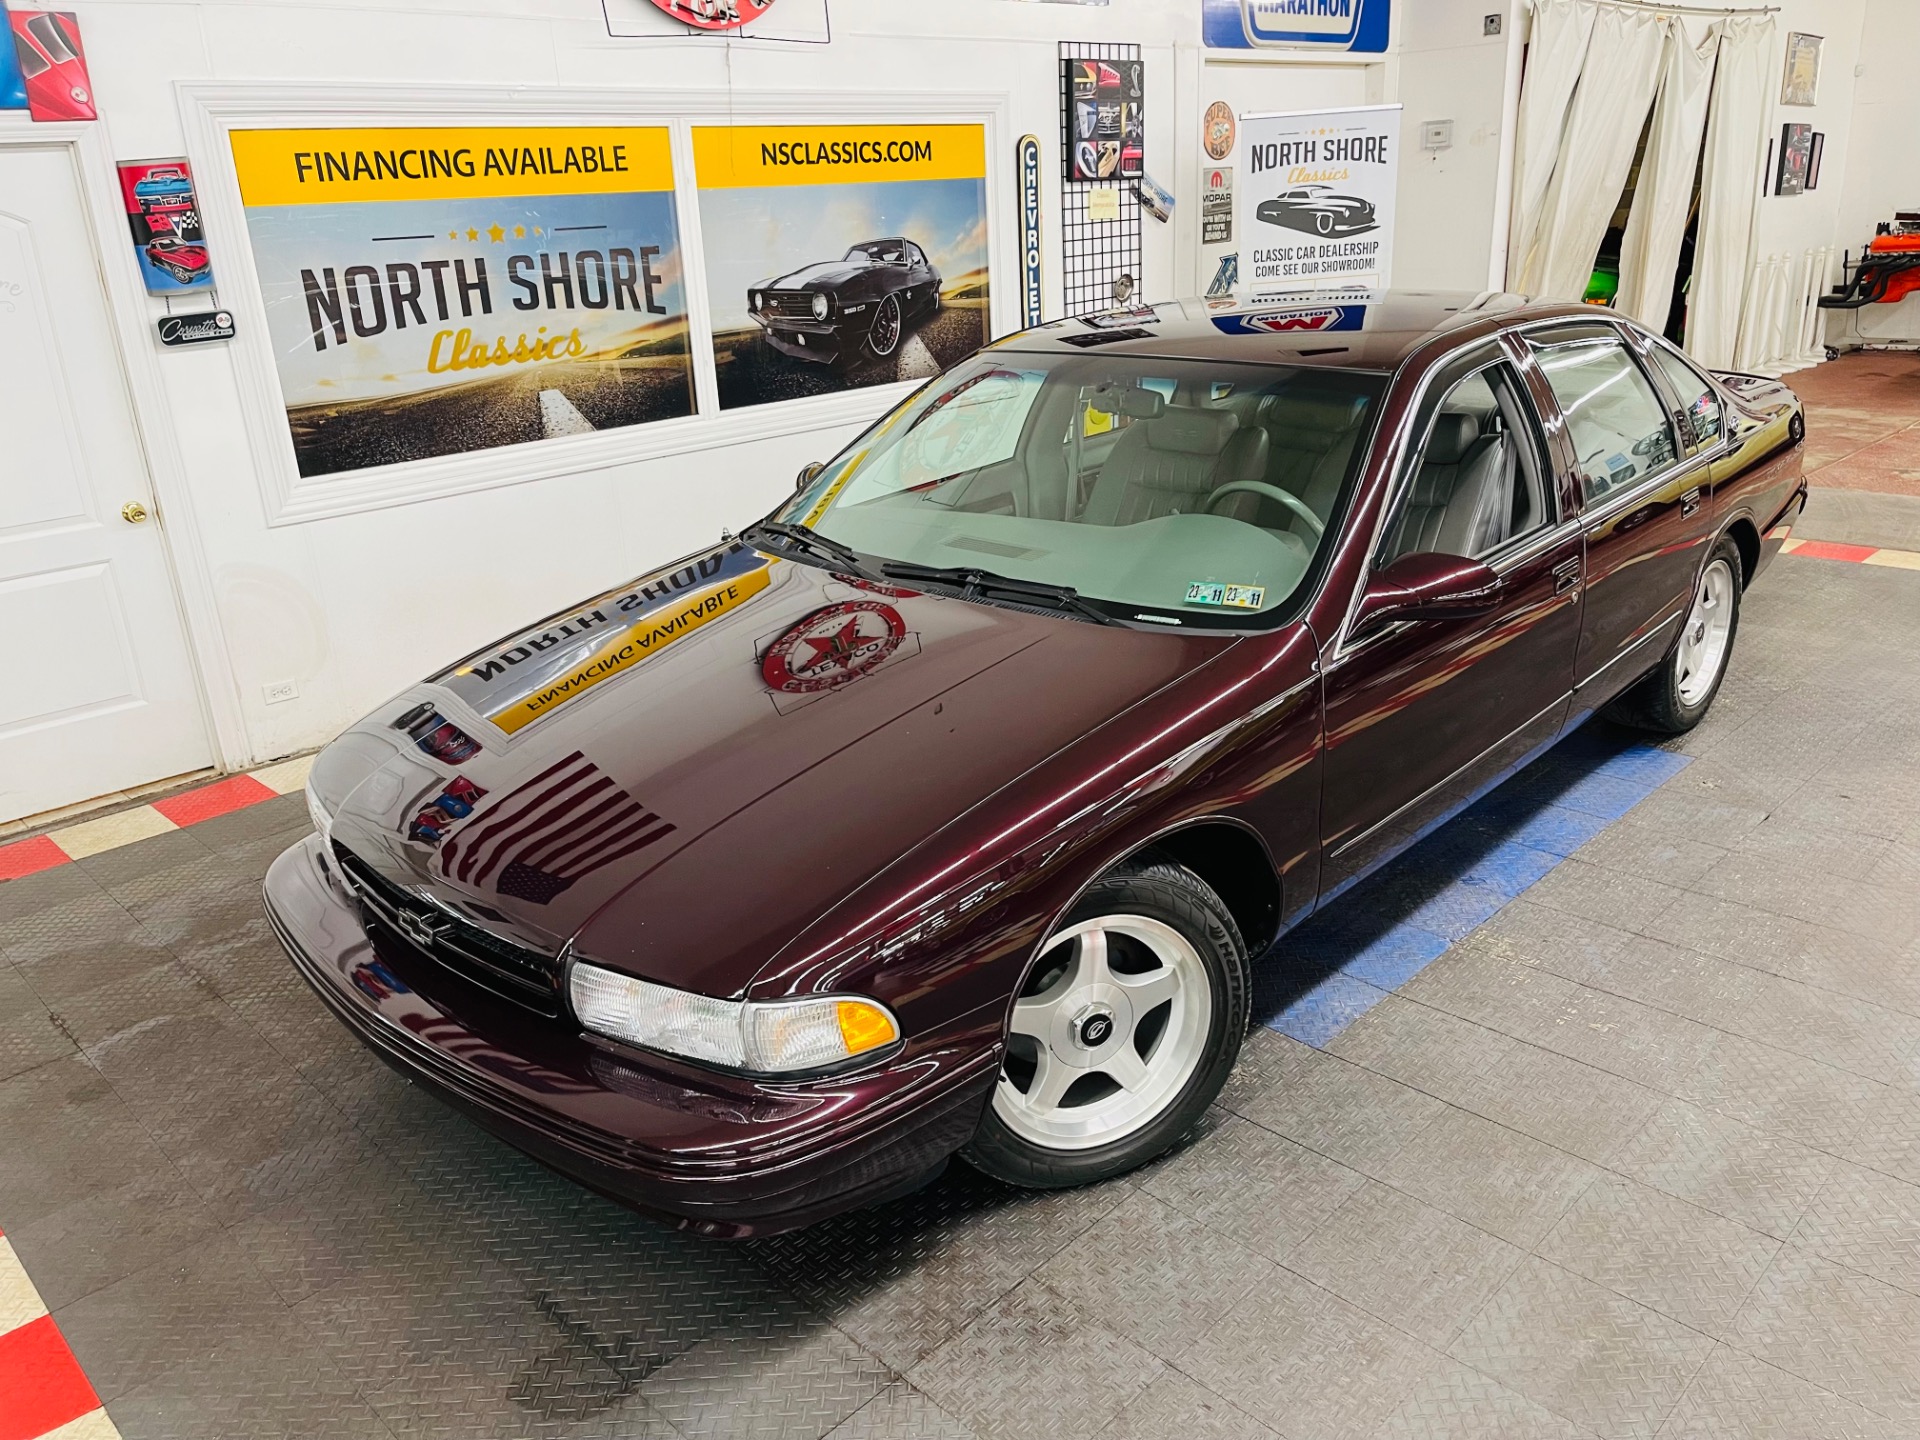 Used 1995 Chevrolet Impala Ss Low Miles See Video For Sale 22 500 North Shore Classics